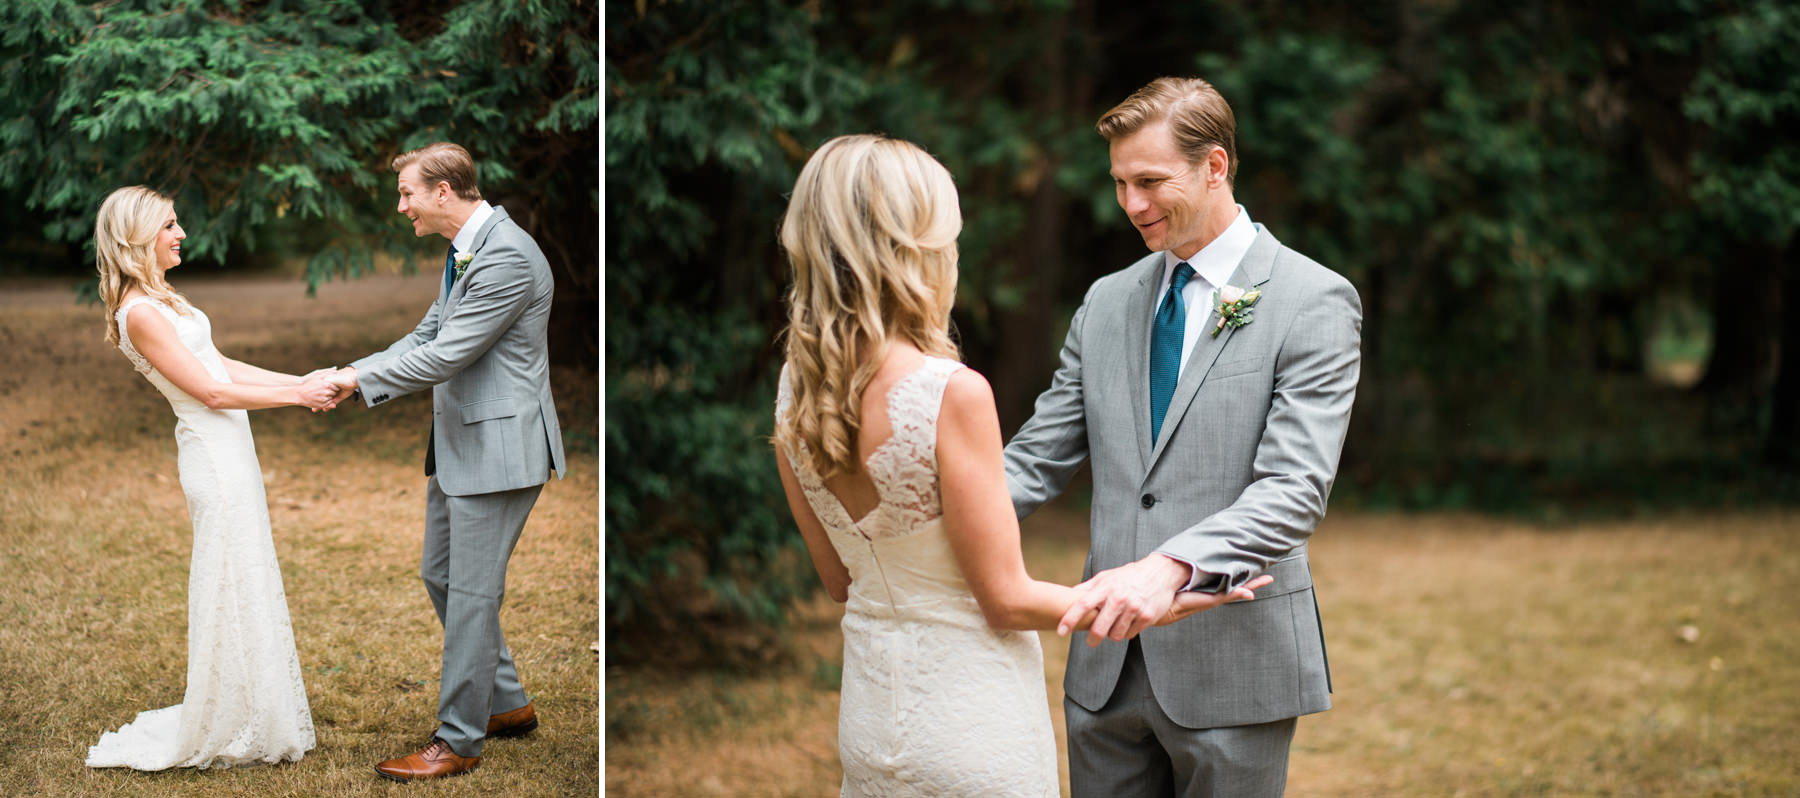 174-wedding-first-look-at-lincoln-park-in-west-seattle.jpg